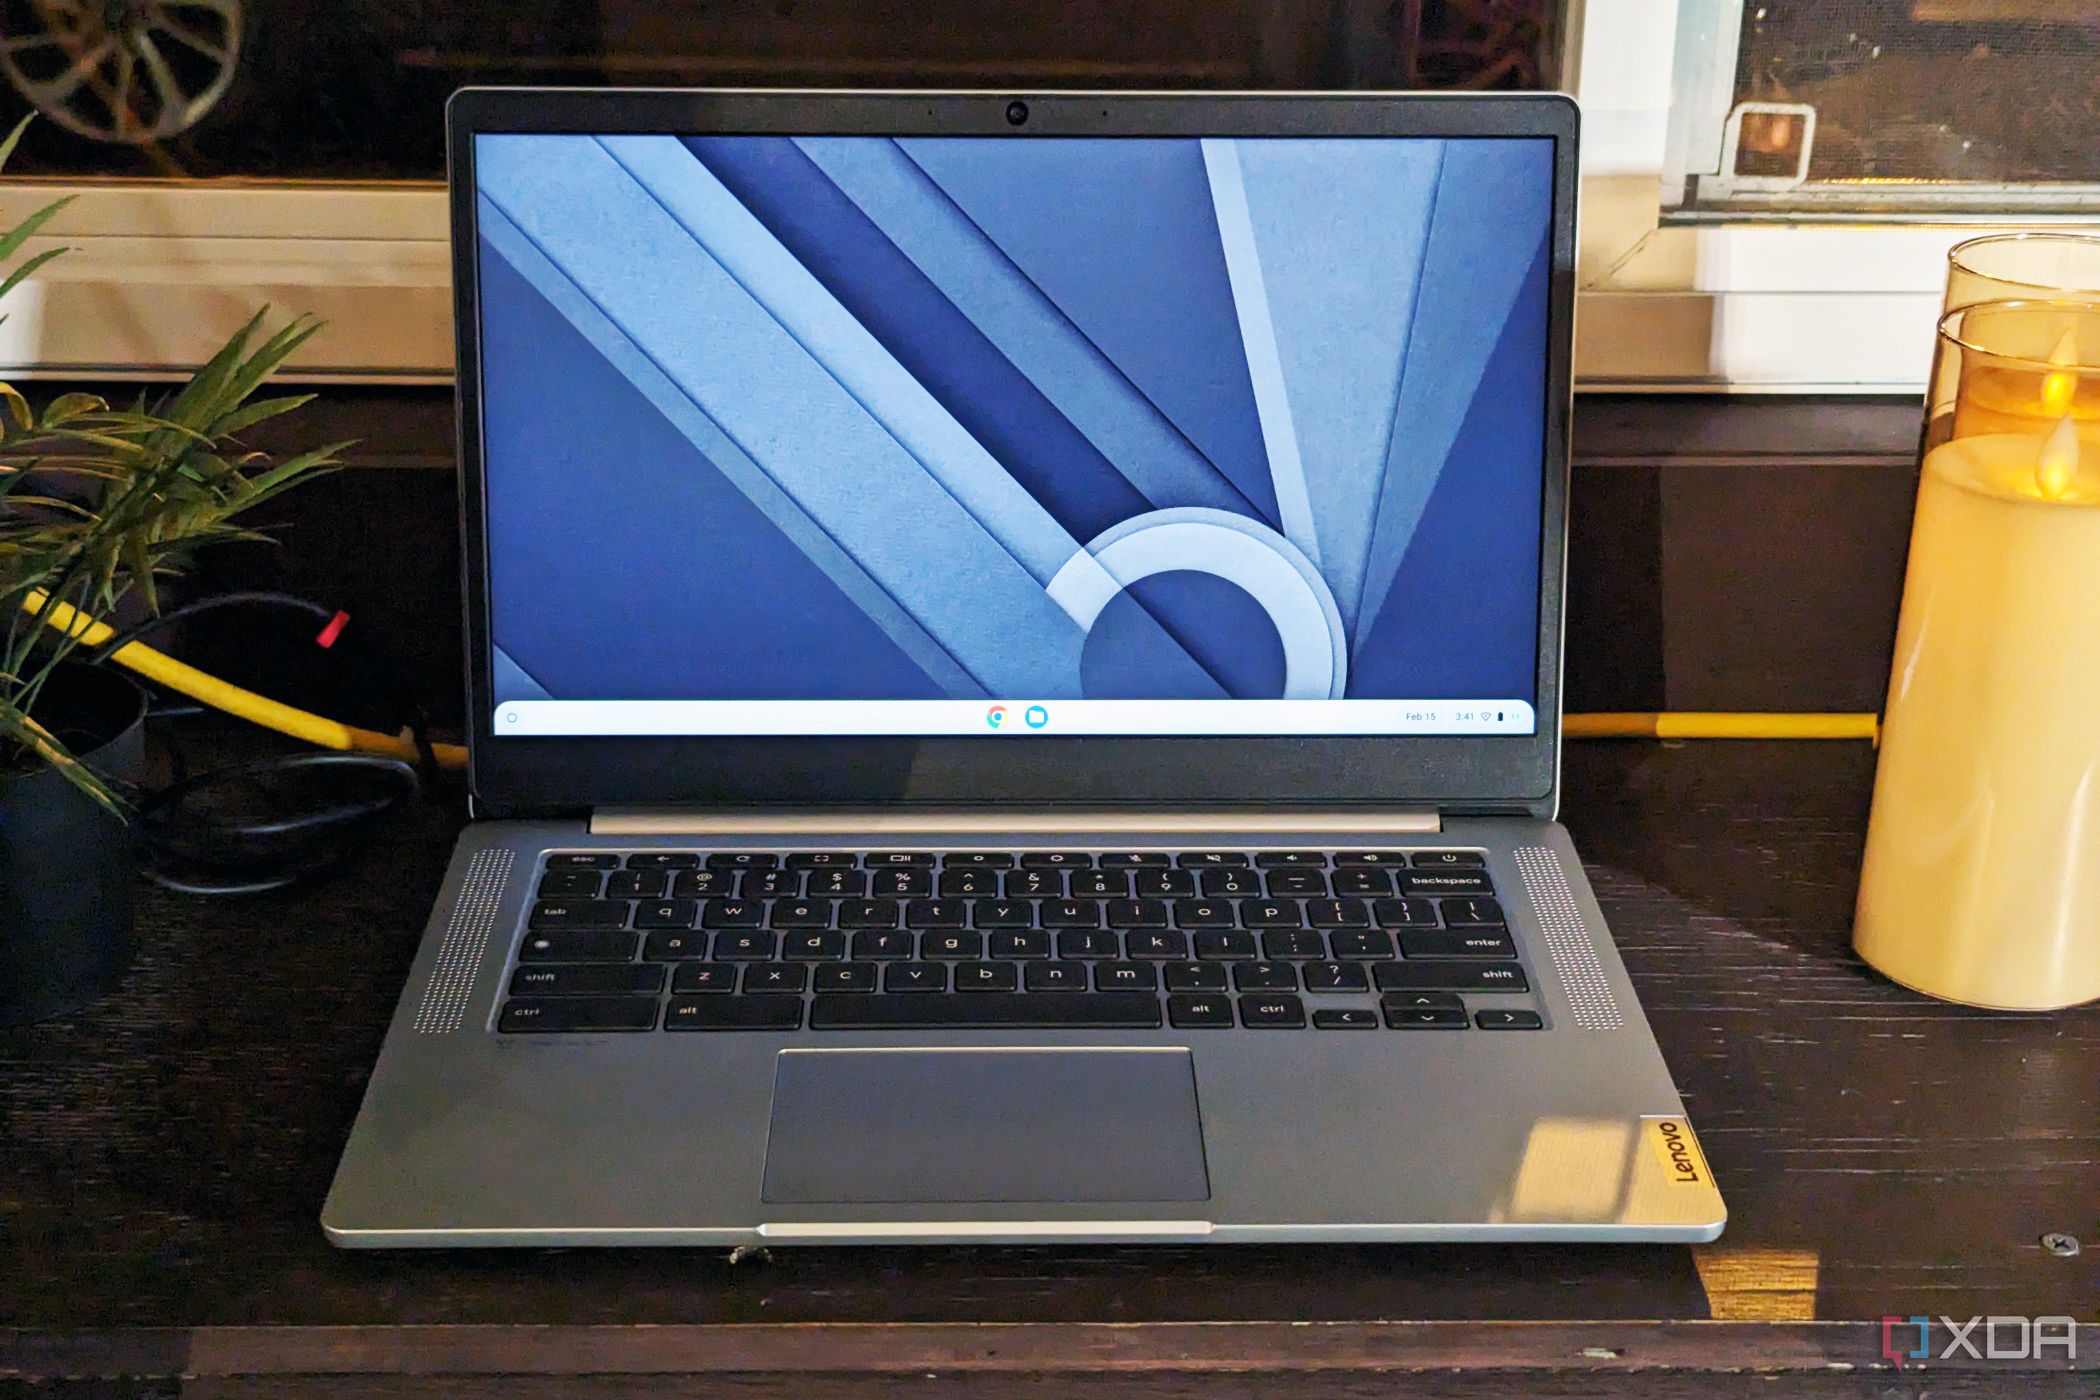 How to check battery health on Chromebook